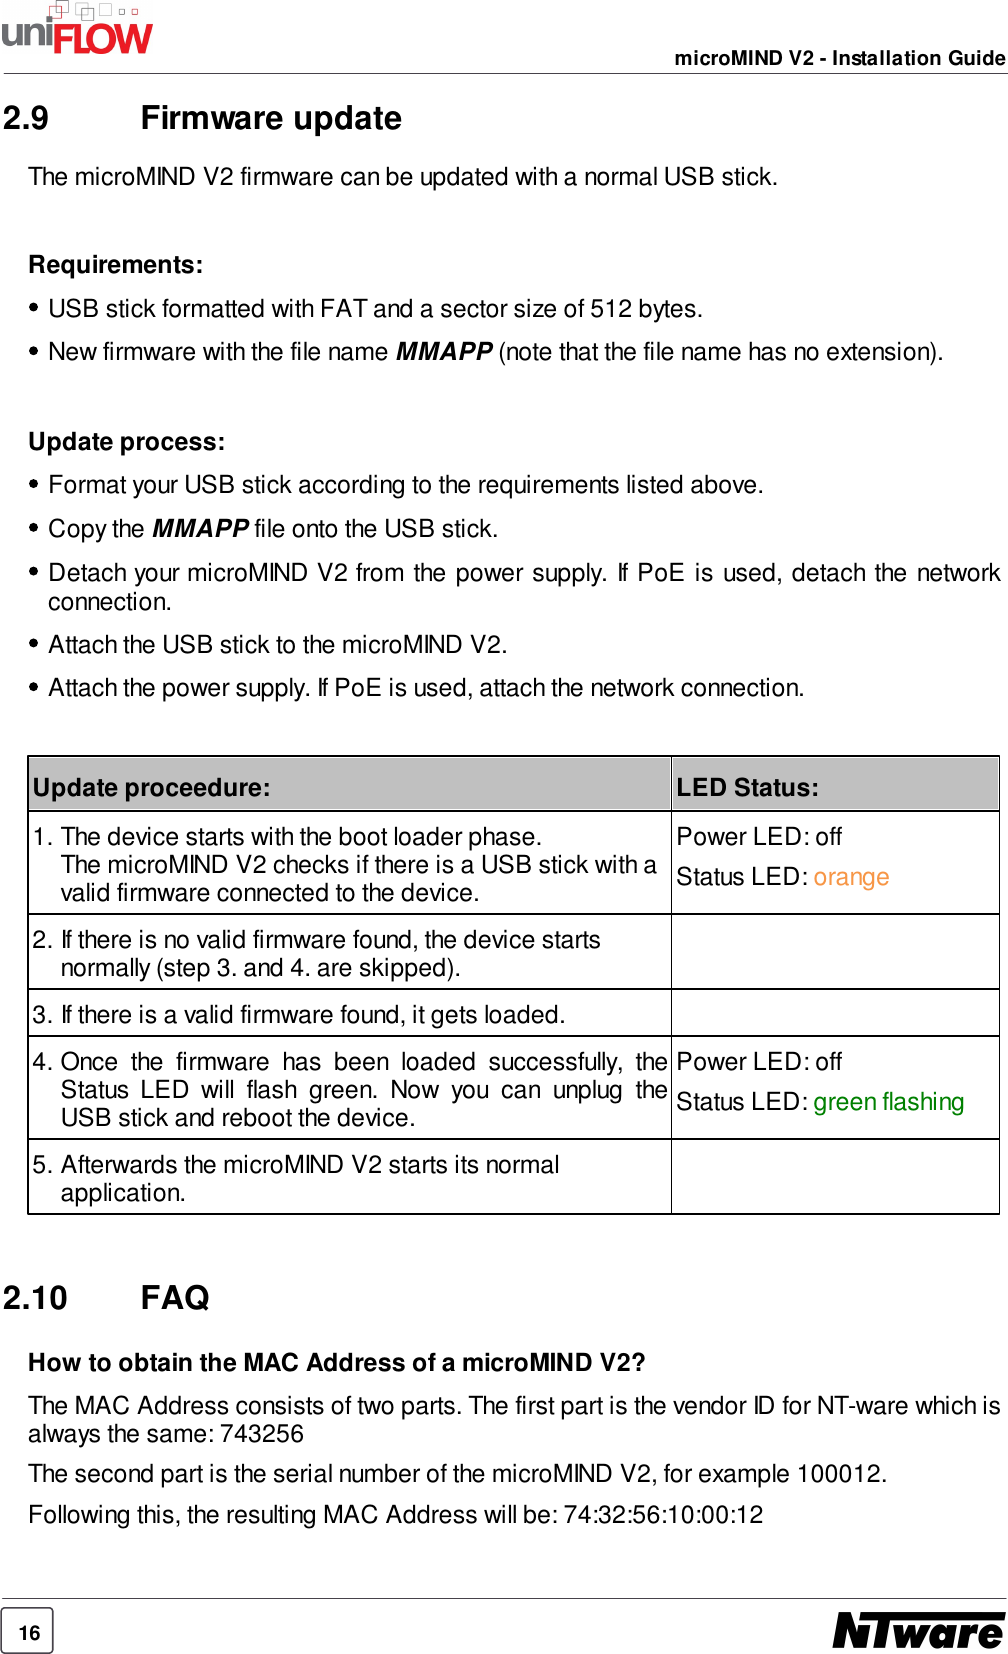 16microMIND V2 - Installation Guide2.9 Firmware updateThe microMIND V2 firmware can be updated with a normal USB stick.Requirements:USB stick formatted with FAT and a sector size of 512 bytes.New firmware with the file name MMAPP (note that the file name has no extension).Update process:Format your USB stick according to the requirements listed above.Copy the MMAPP file onto the USB stick.Detach your microMIND V2 from the power supply. If PoE  is used, detach the networkconnection.Attach the USB stick to the microMIND V2.Attach the power supply. If PoE is used, attach the network connection.Update proceedure:LED Status:1. The device starts with the boot loader phase.The microMIND V2 checks if there is a USB stick with avalid firmware connected to the device.Power LED: offStatus LED: orange2. If there is no valid firmware found, the device startsnormally (step 3. and 4. are skipped).3. If there is a valid firmware found, it gets loaded.4. Once  the  firmware  has  been  loaded  successfully,  theStatus  LED  will  flash  green.  Now  you  can  unplug  theUSB stick and reboot the device.Power LED: offStatus LED: green flashing5. Afterwards the microMIND V2 starts its normalapplication.2.10 FAQHow to obtain the MAC Address of a microMIND V2?The MAC Address consists of two parts. The first part is the vendor ID for NT-ware which isalways the same: 743256The second part is the serial number of the microMIND V2, for example 100012.Following this, the resulting MAC Address will be: 74:32:56:10:00:12